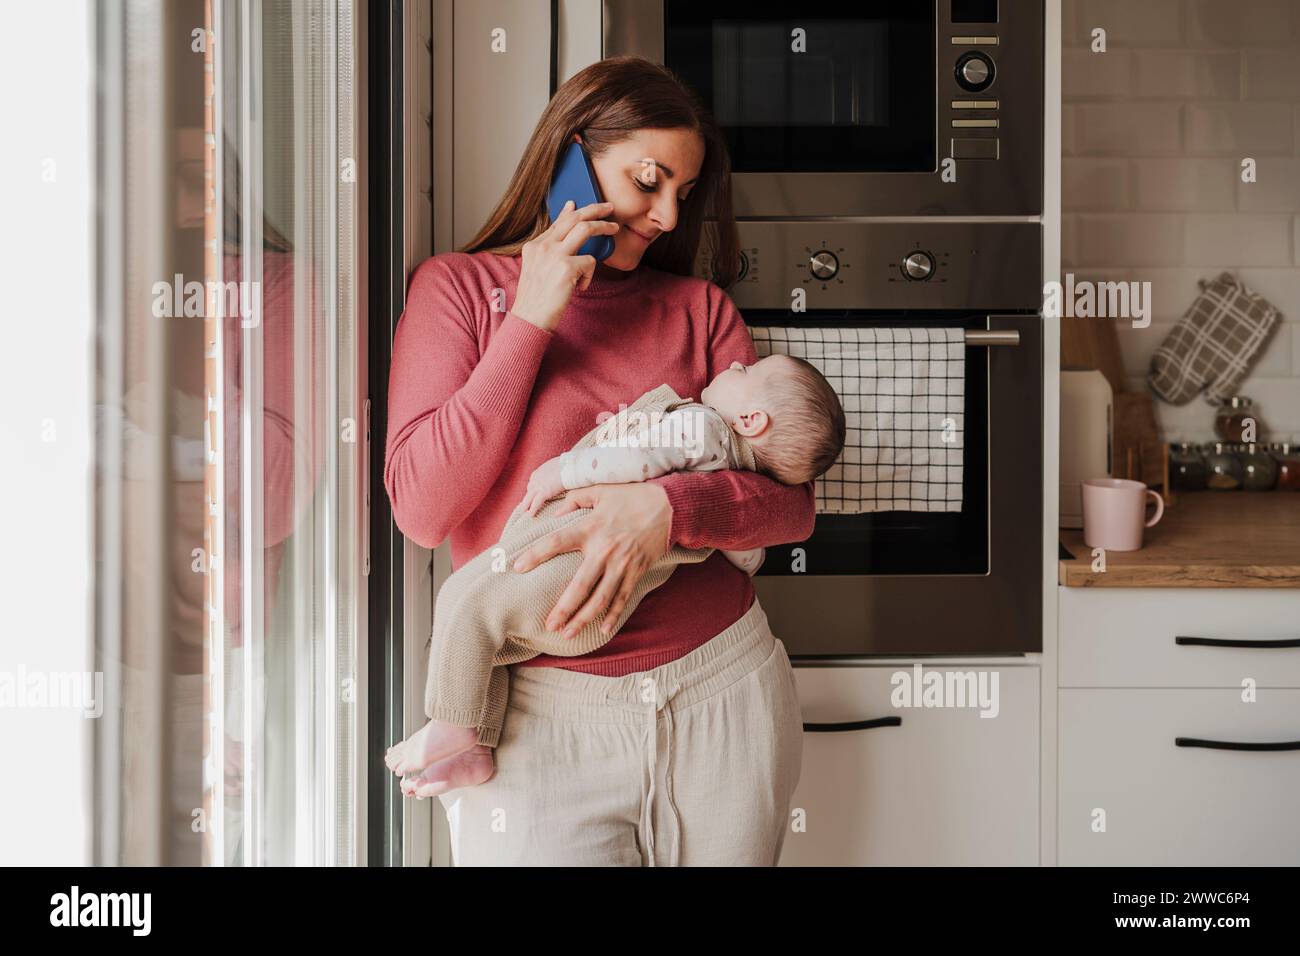 Smiling woman talking on smart phone and carrying baby daughter in kitchen Stock Photo